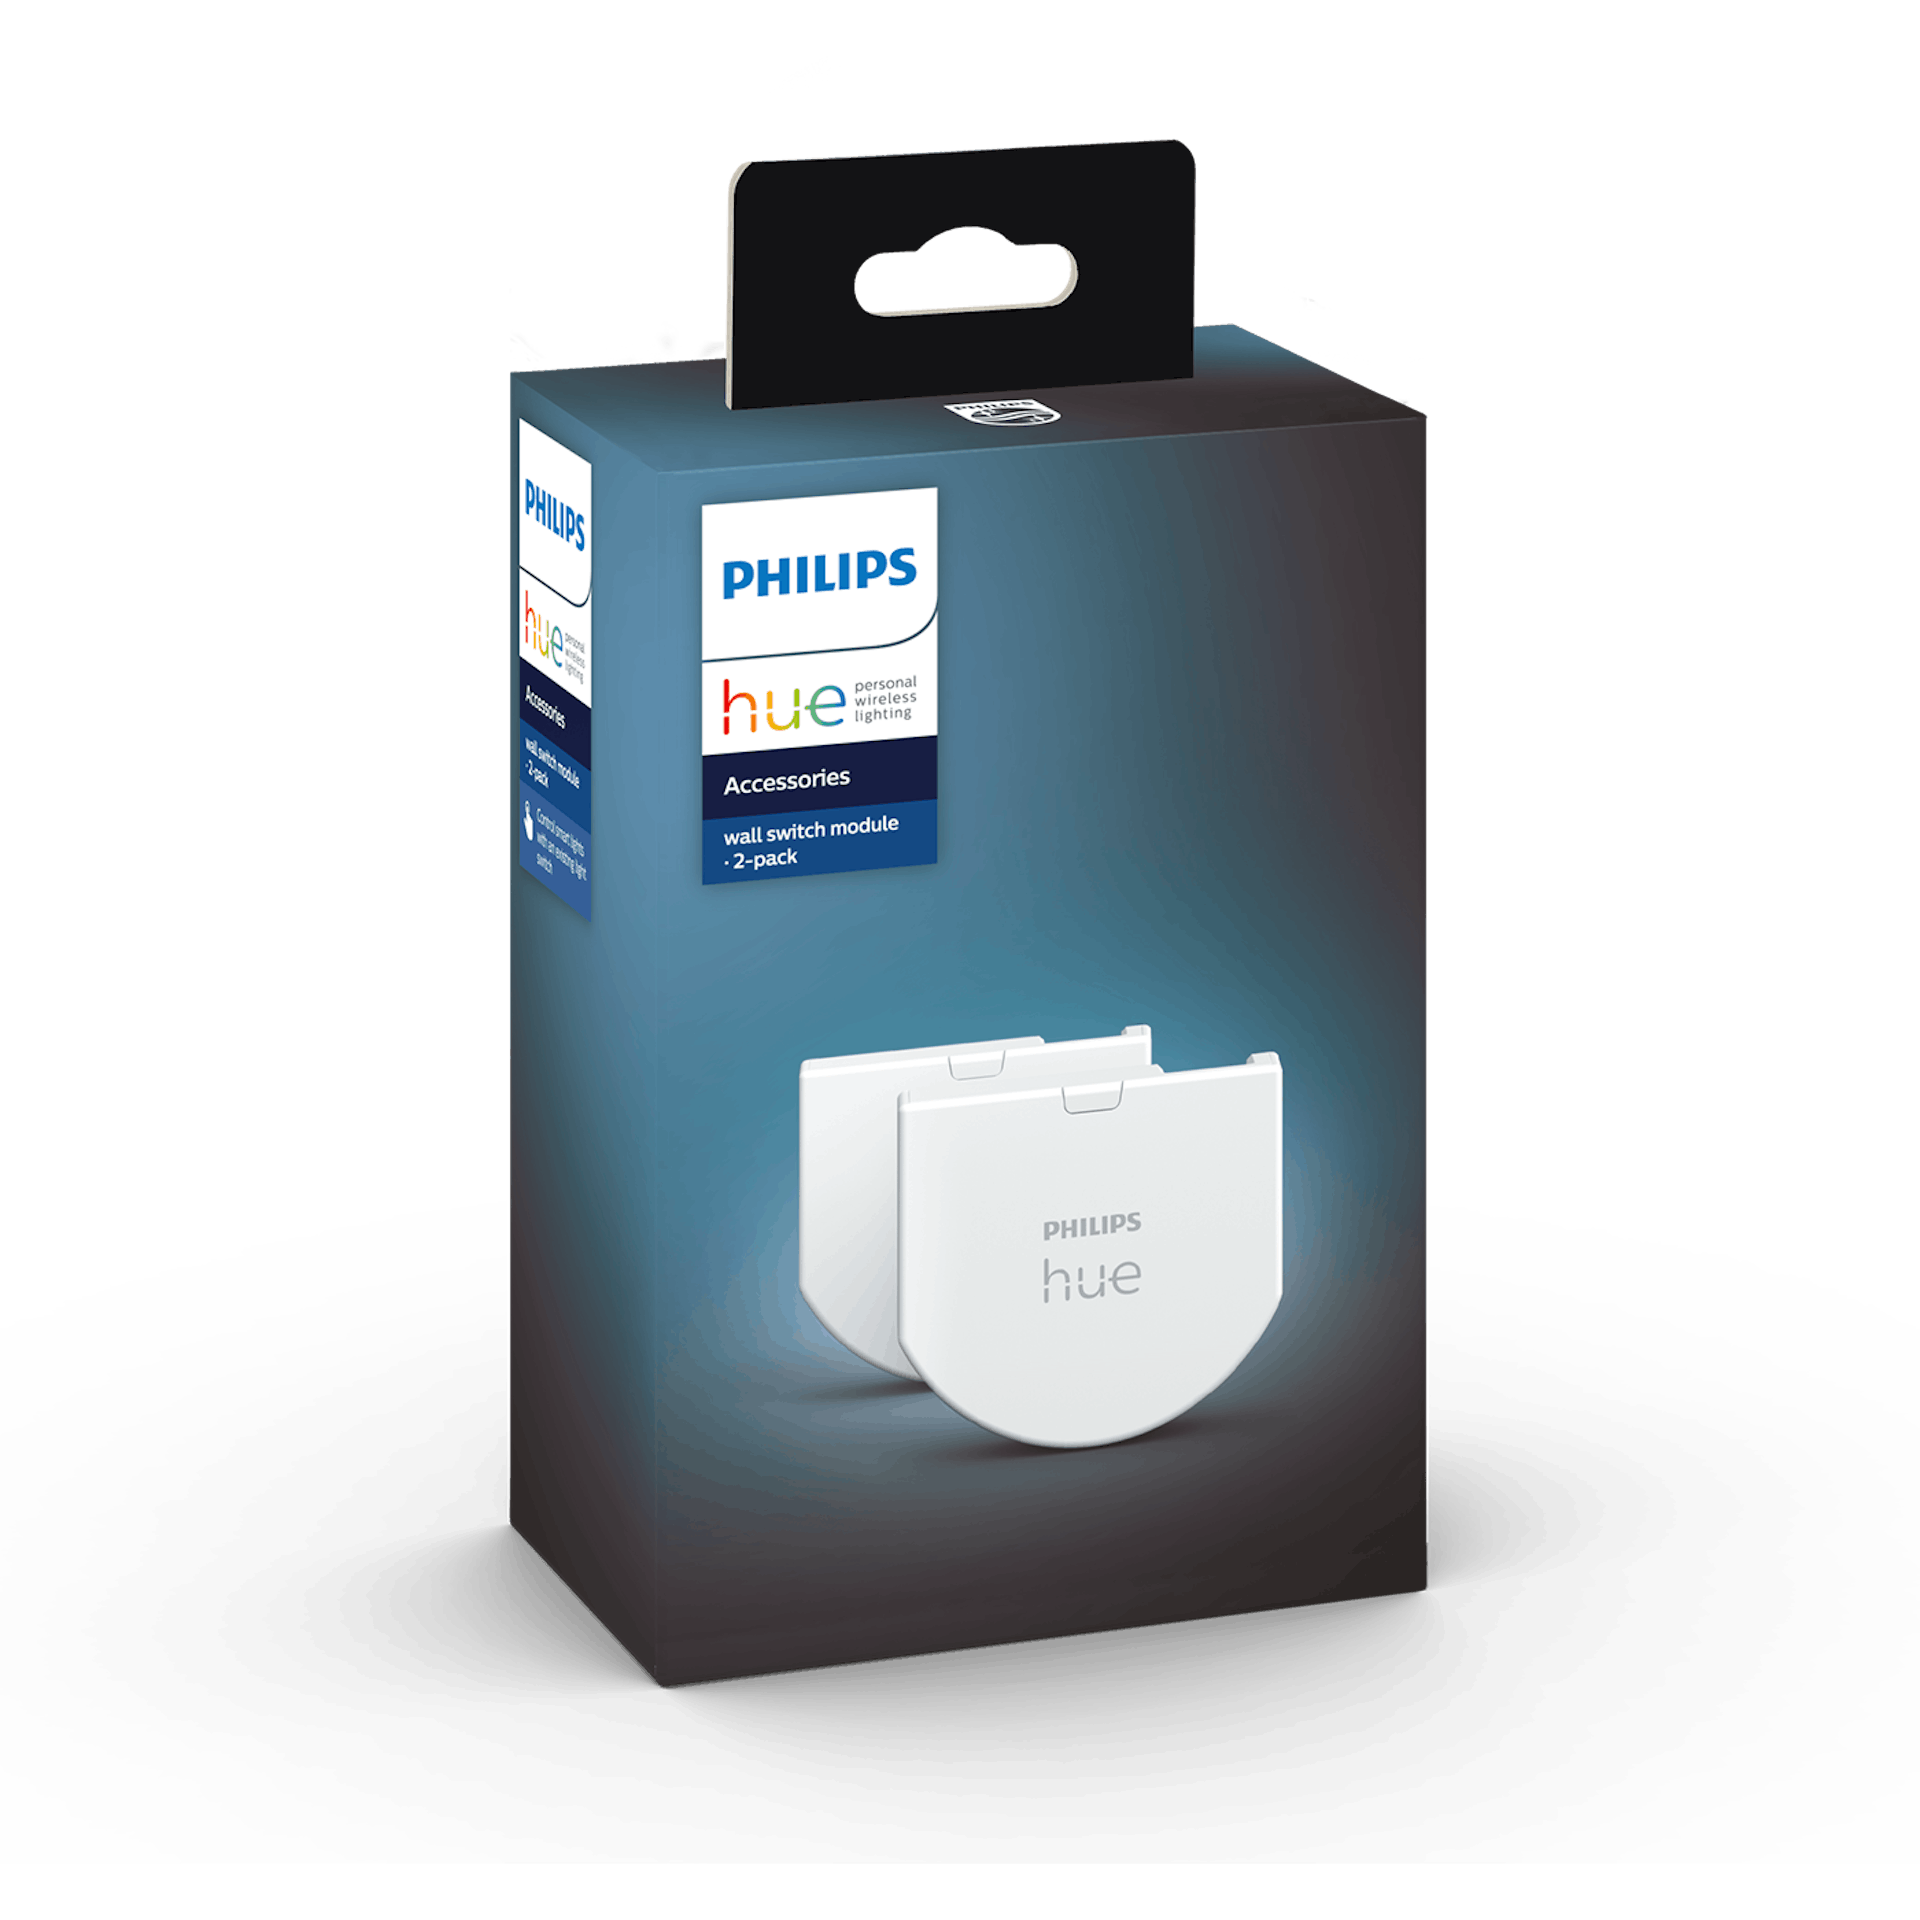 Philips Hue - Wall switch module (2-pack) - Package